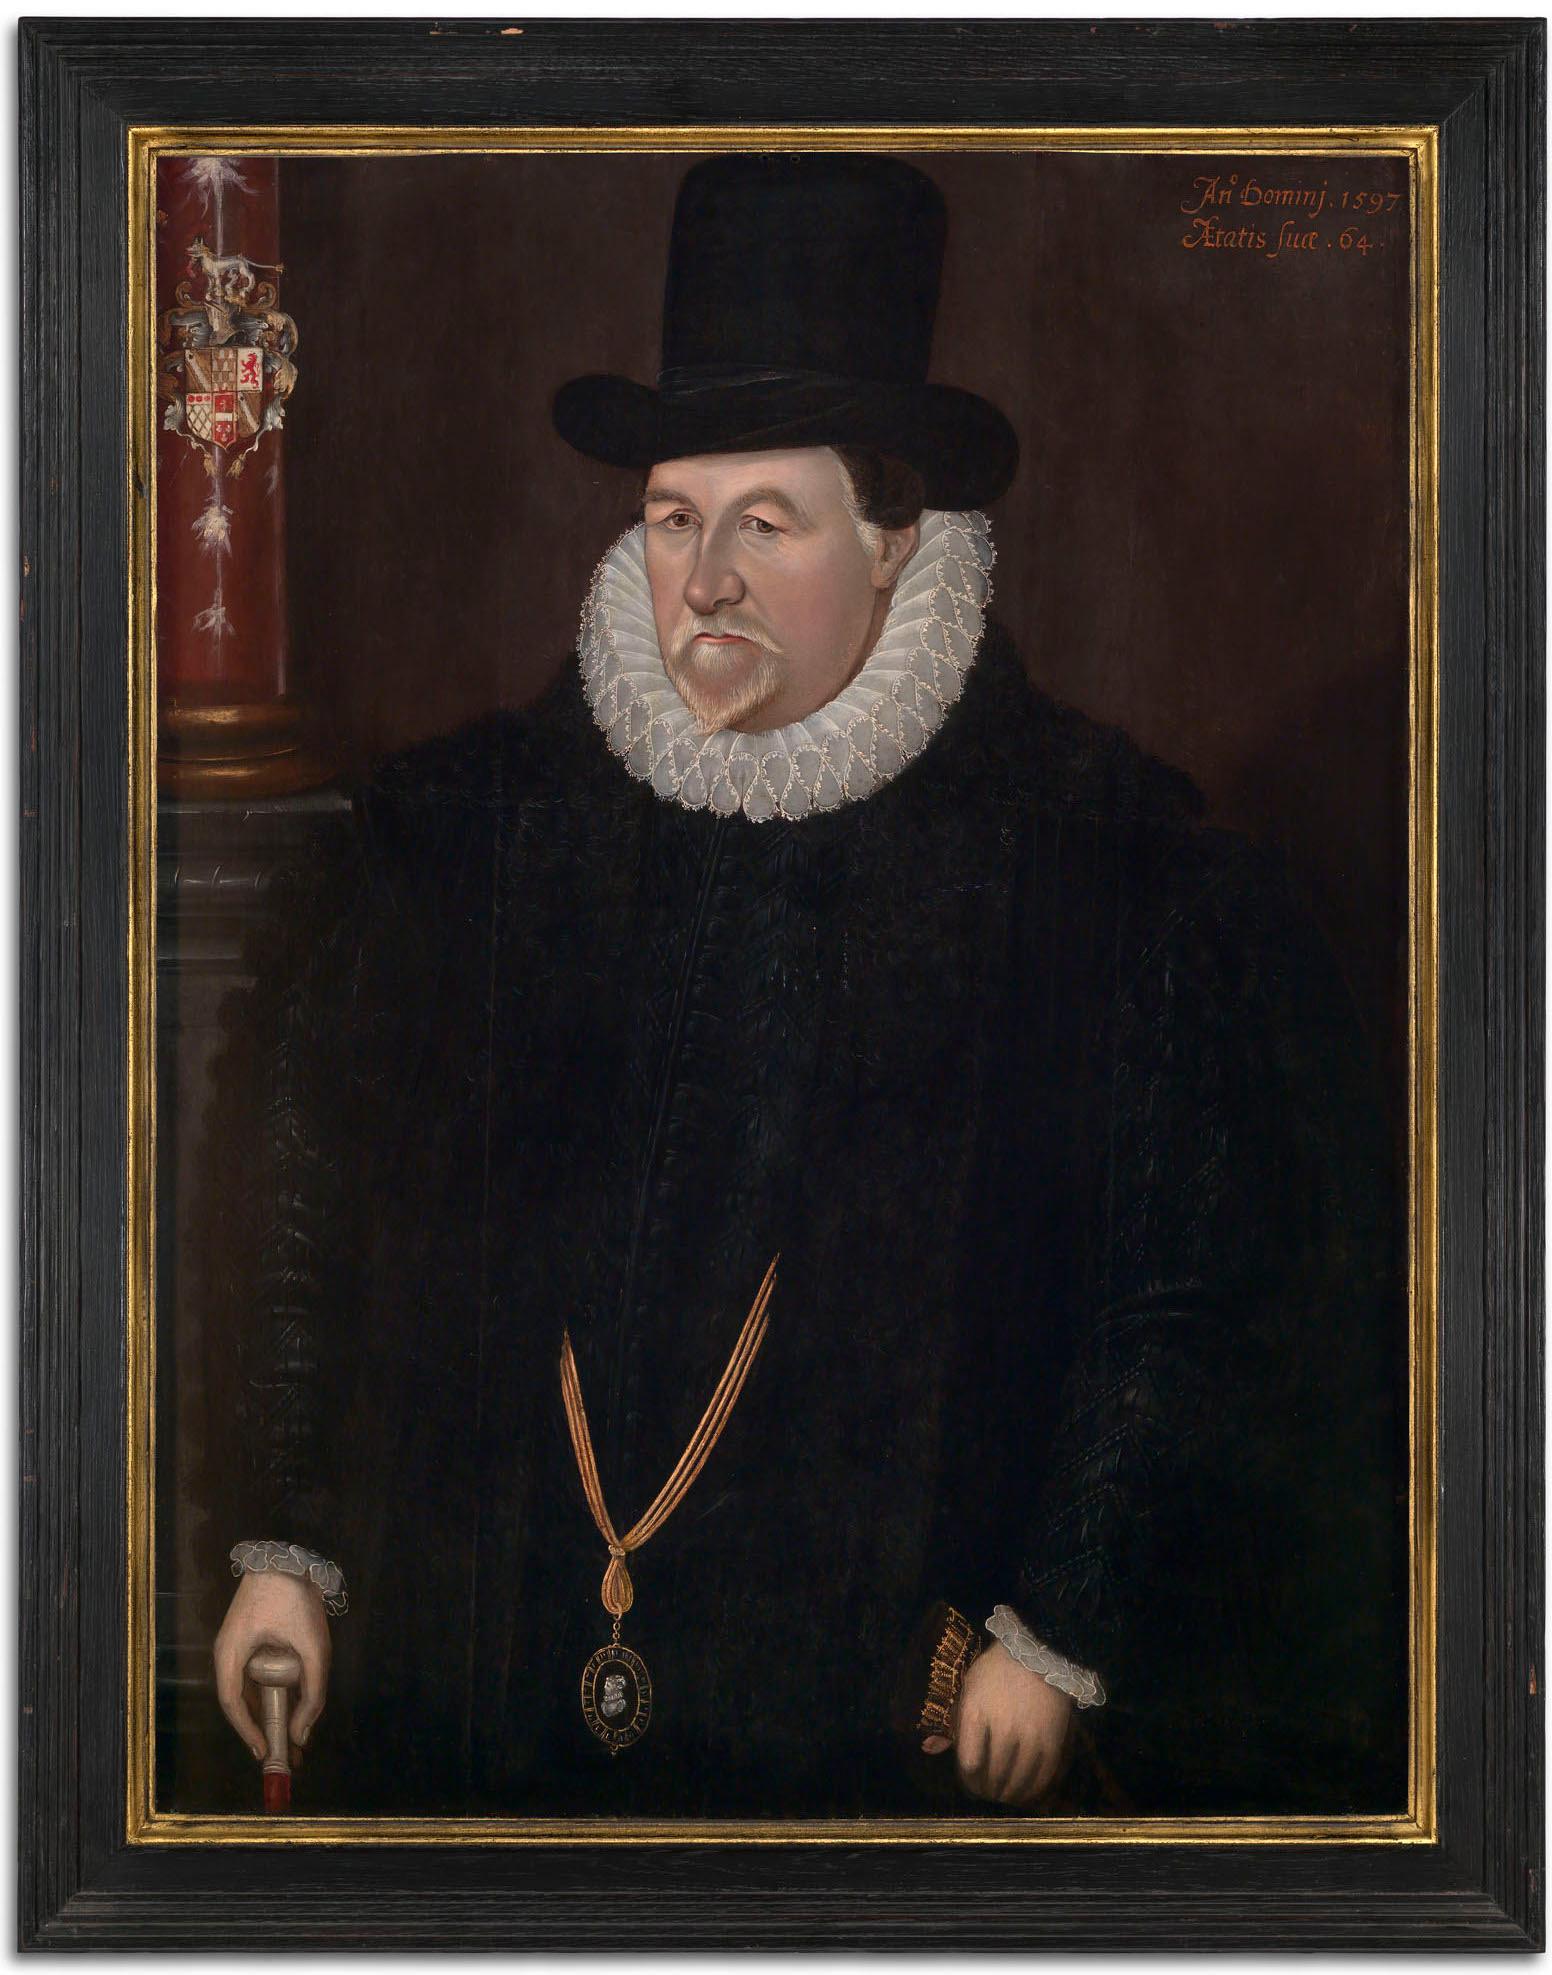 Sir John Fortescue An Elizabethan Portrait of A 17th Century English Statesman  - Painting by Unknown